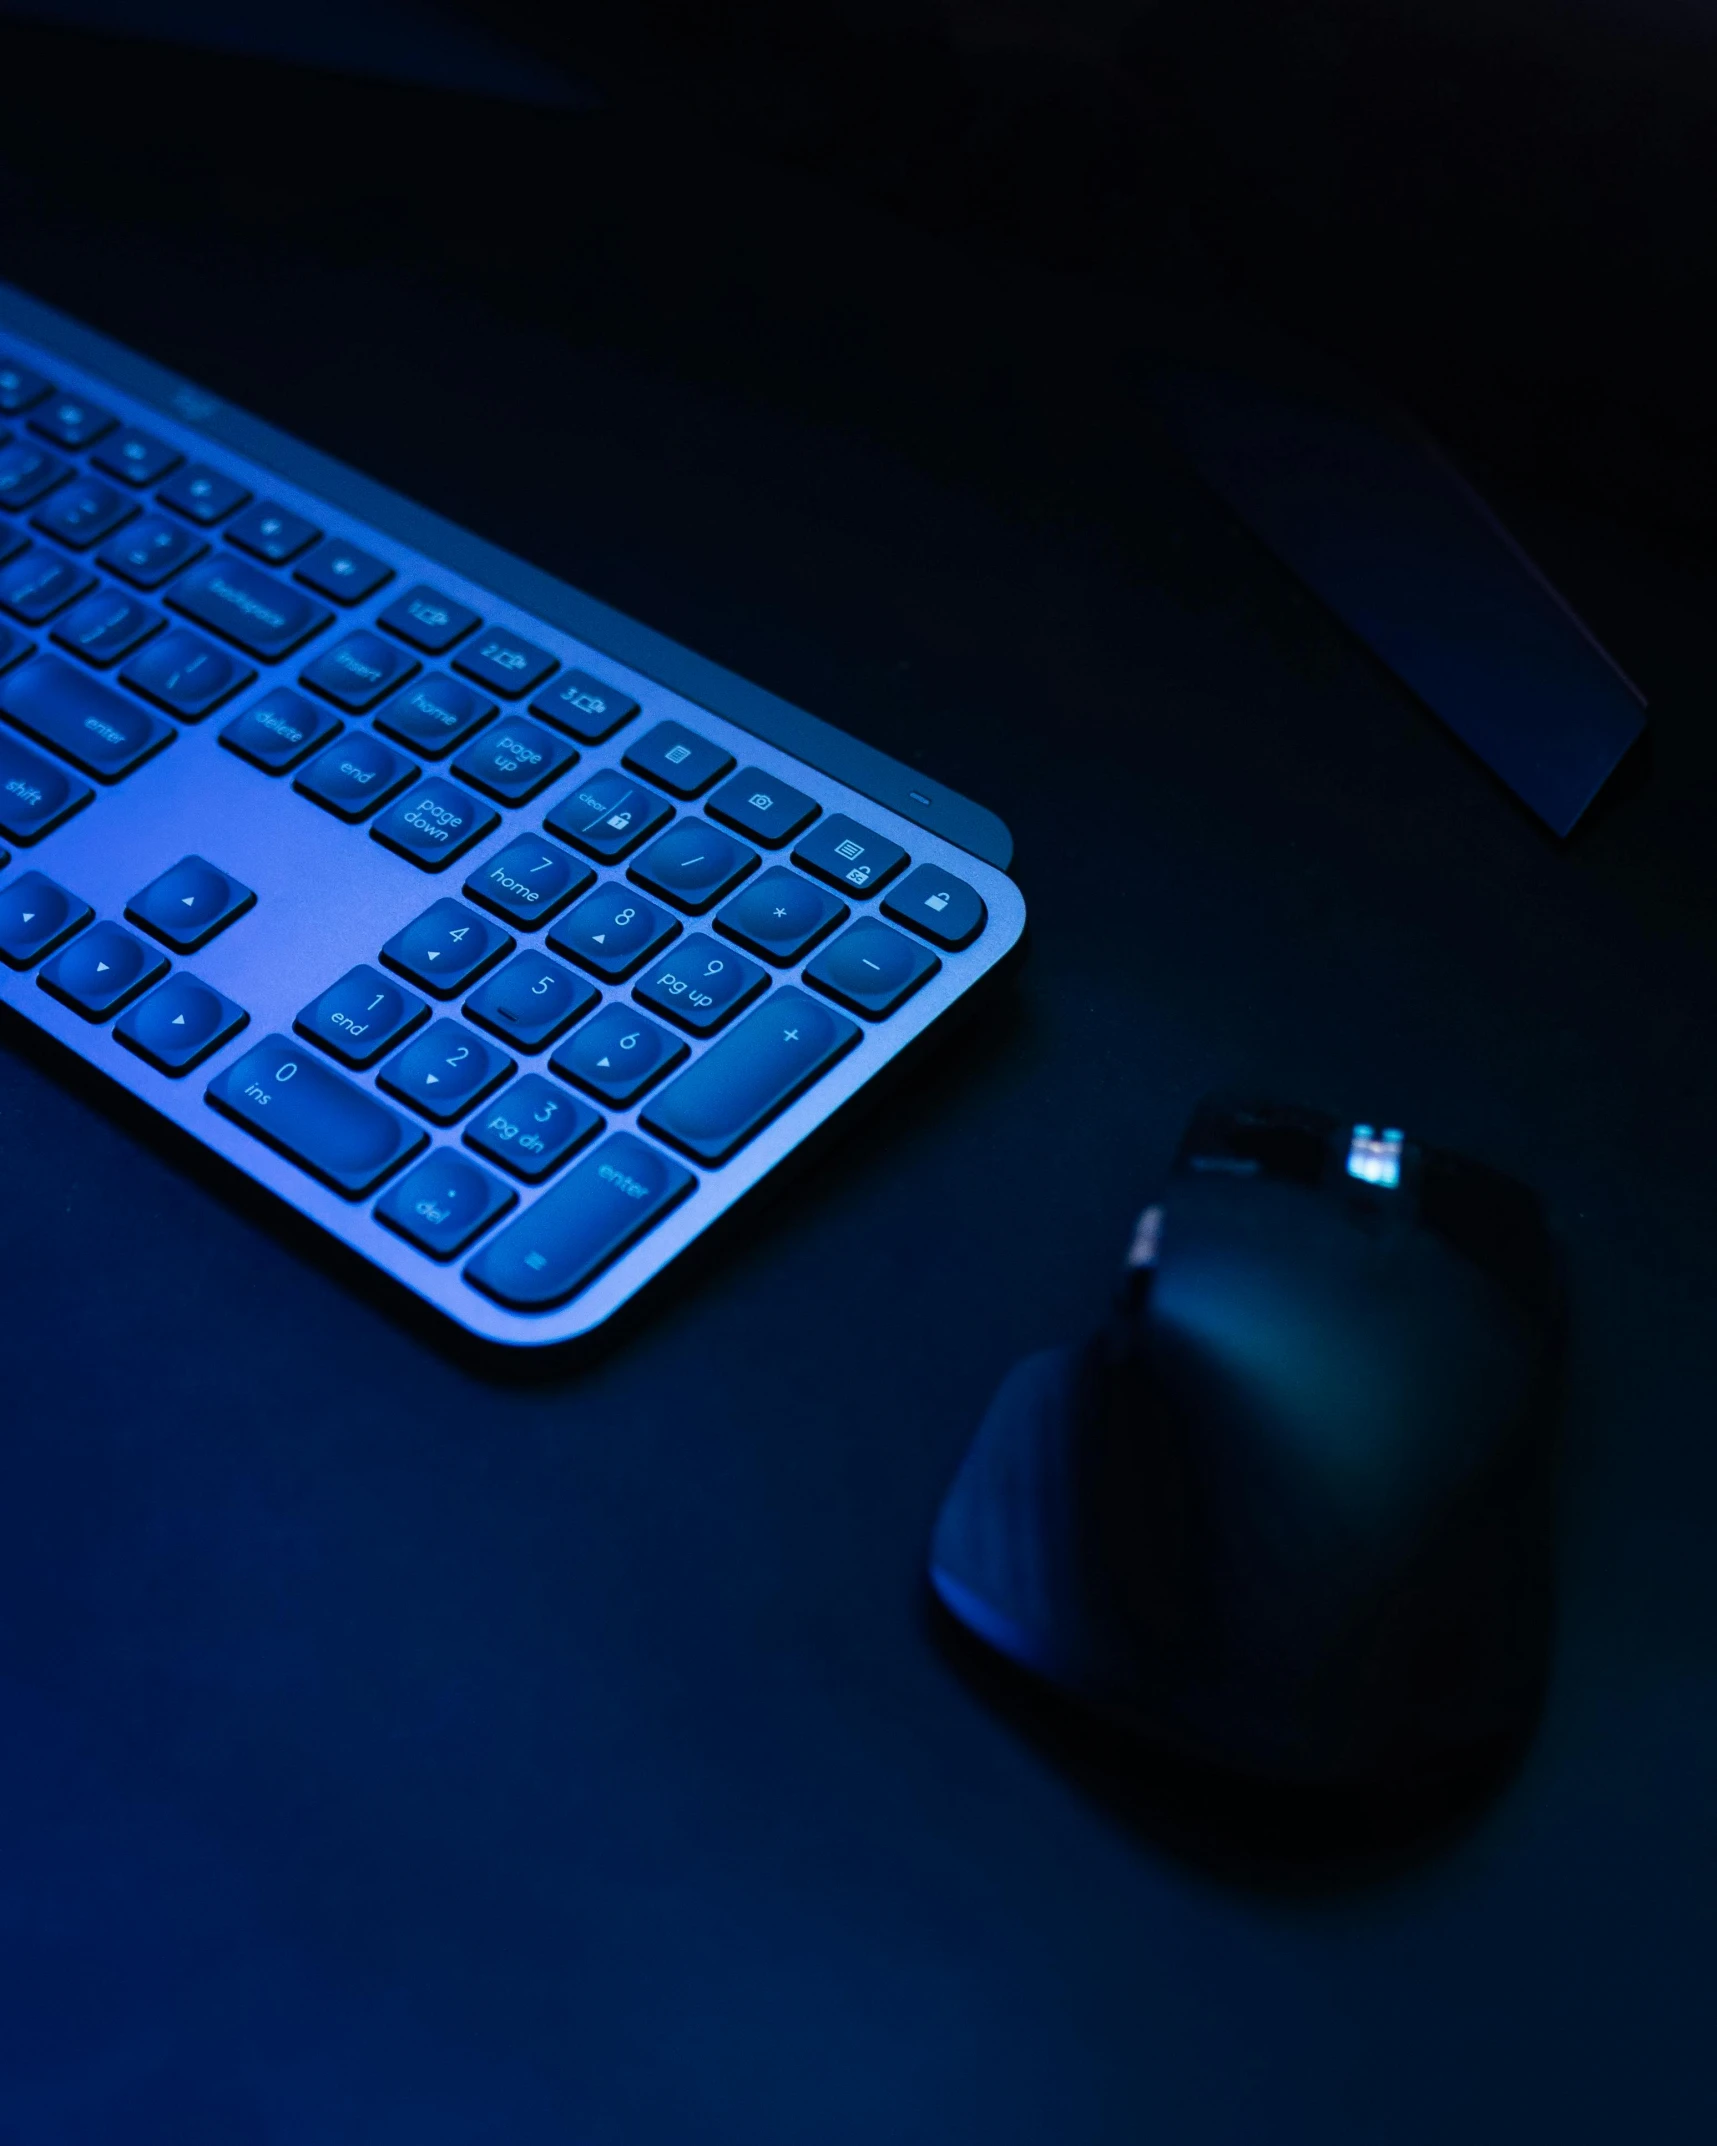 a computer keyboard and mouse on a desk, by Ryan Pancoast, dark blue neon light, thumbnail, low iso, image